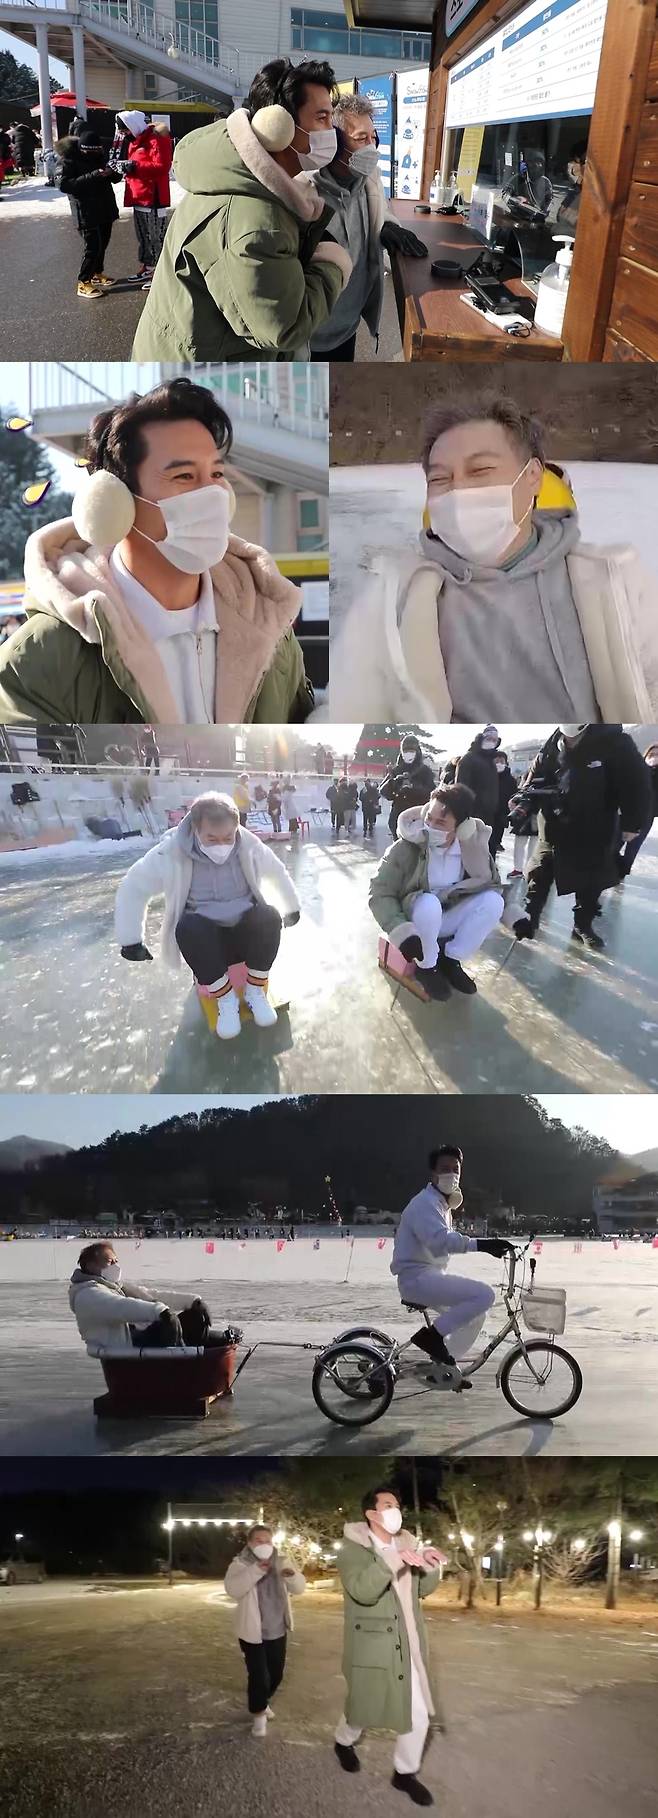 According to the KBS 2TV entertainment program New Family Relationship Certificate The Last Godfather (hereinafter referred to as The Last Godfather) on the 14th, so-called Deer Wealthy Kim Kap-soo and Jang Min-Ho will visit the snow sledding to enjoy winter.In a recent recording, Kim Kap-soo and Jang Min-Ho were delighted as a child as they entered the snow sled.Kim Kap-soo was excited to show Jang Min-Hos No Correct dance, but they faced a crisis in front of the ticket office.Kim Kap-soo was greatly embarrassed to hear from the ticket office staff; Jang Min-Ho was shocked by the firm employees response, and was sweating.From the beginning of the snow sledge, I am curious about what happened to Deer Wealthy.Deer Wealthy tit-for-tat Chemmy also unfolds: Kim Kap-soo and Jang Min-Ho, who bet every time they play the game.As they found the snow sled, they played a winter-related game and burned their desire to win.Meanwhile, The Last Godfather will be broadcasted at 10:50 pm on the 16th due to the 2022 Beijing Winter Olympics broadcast.